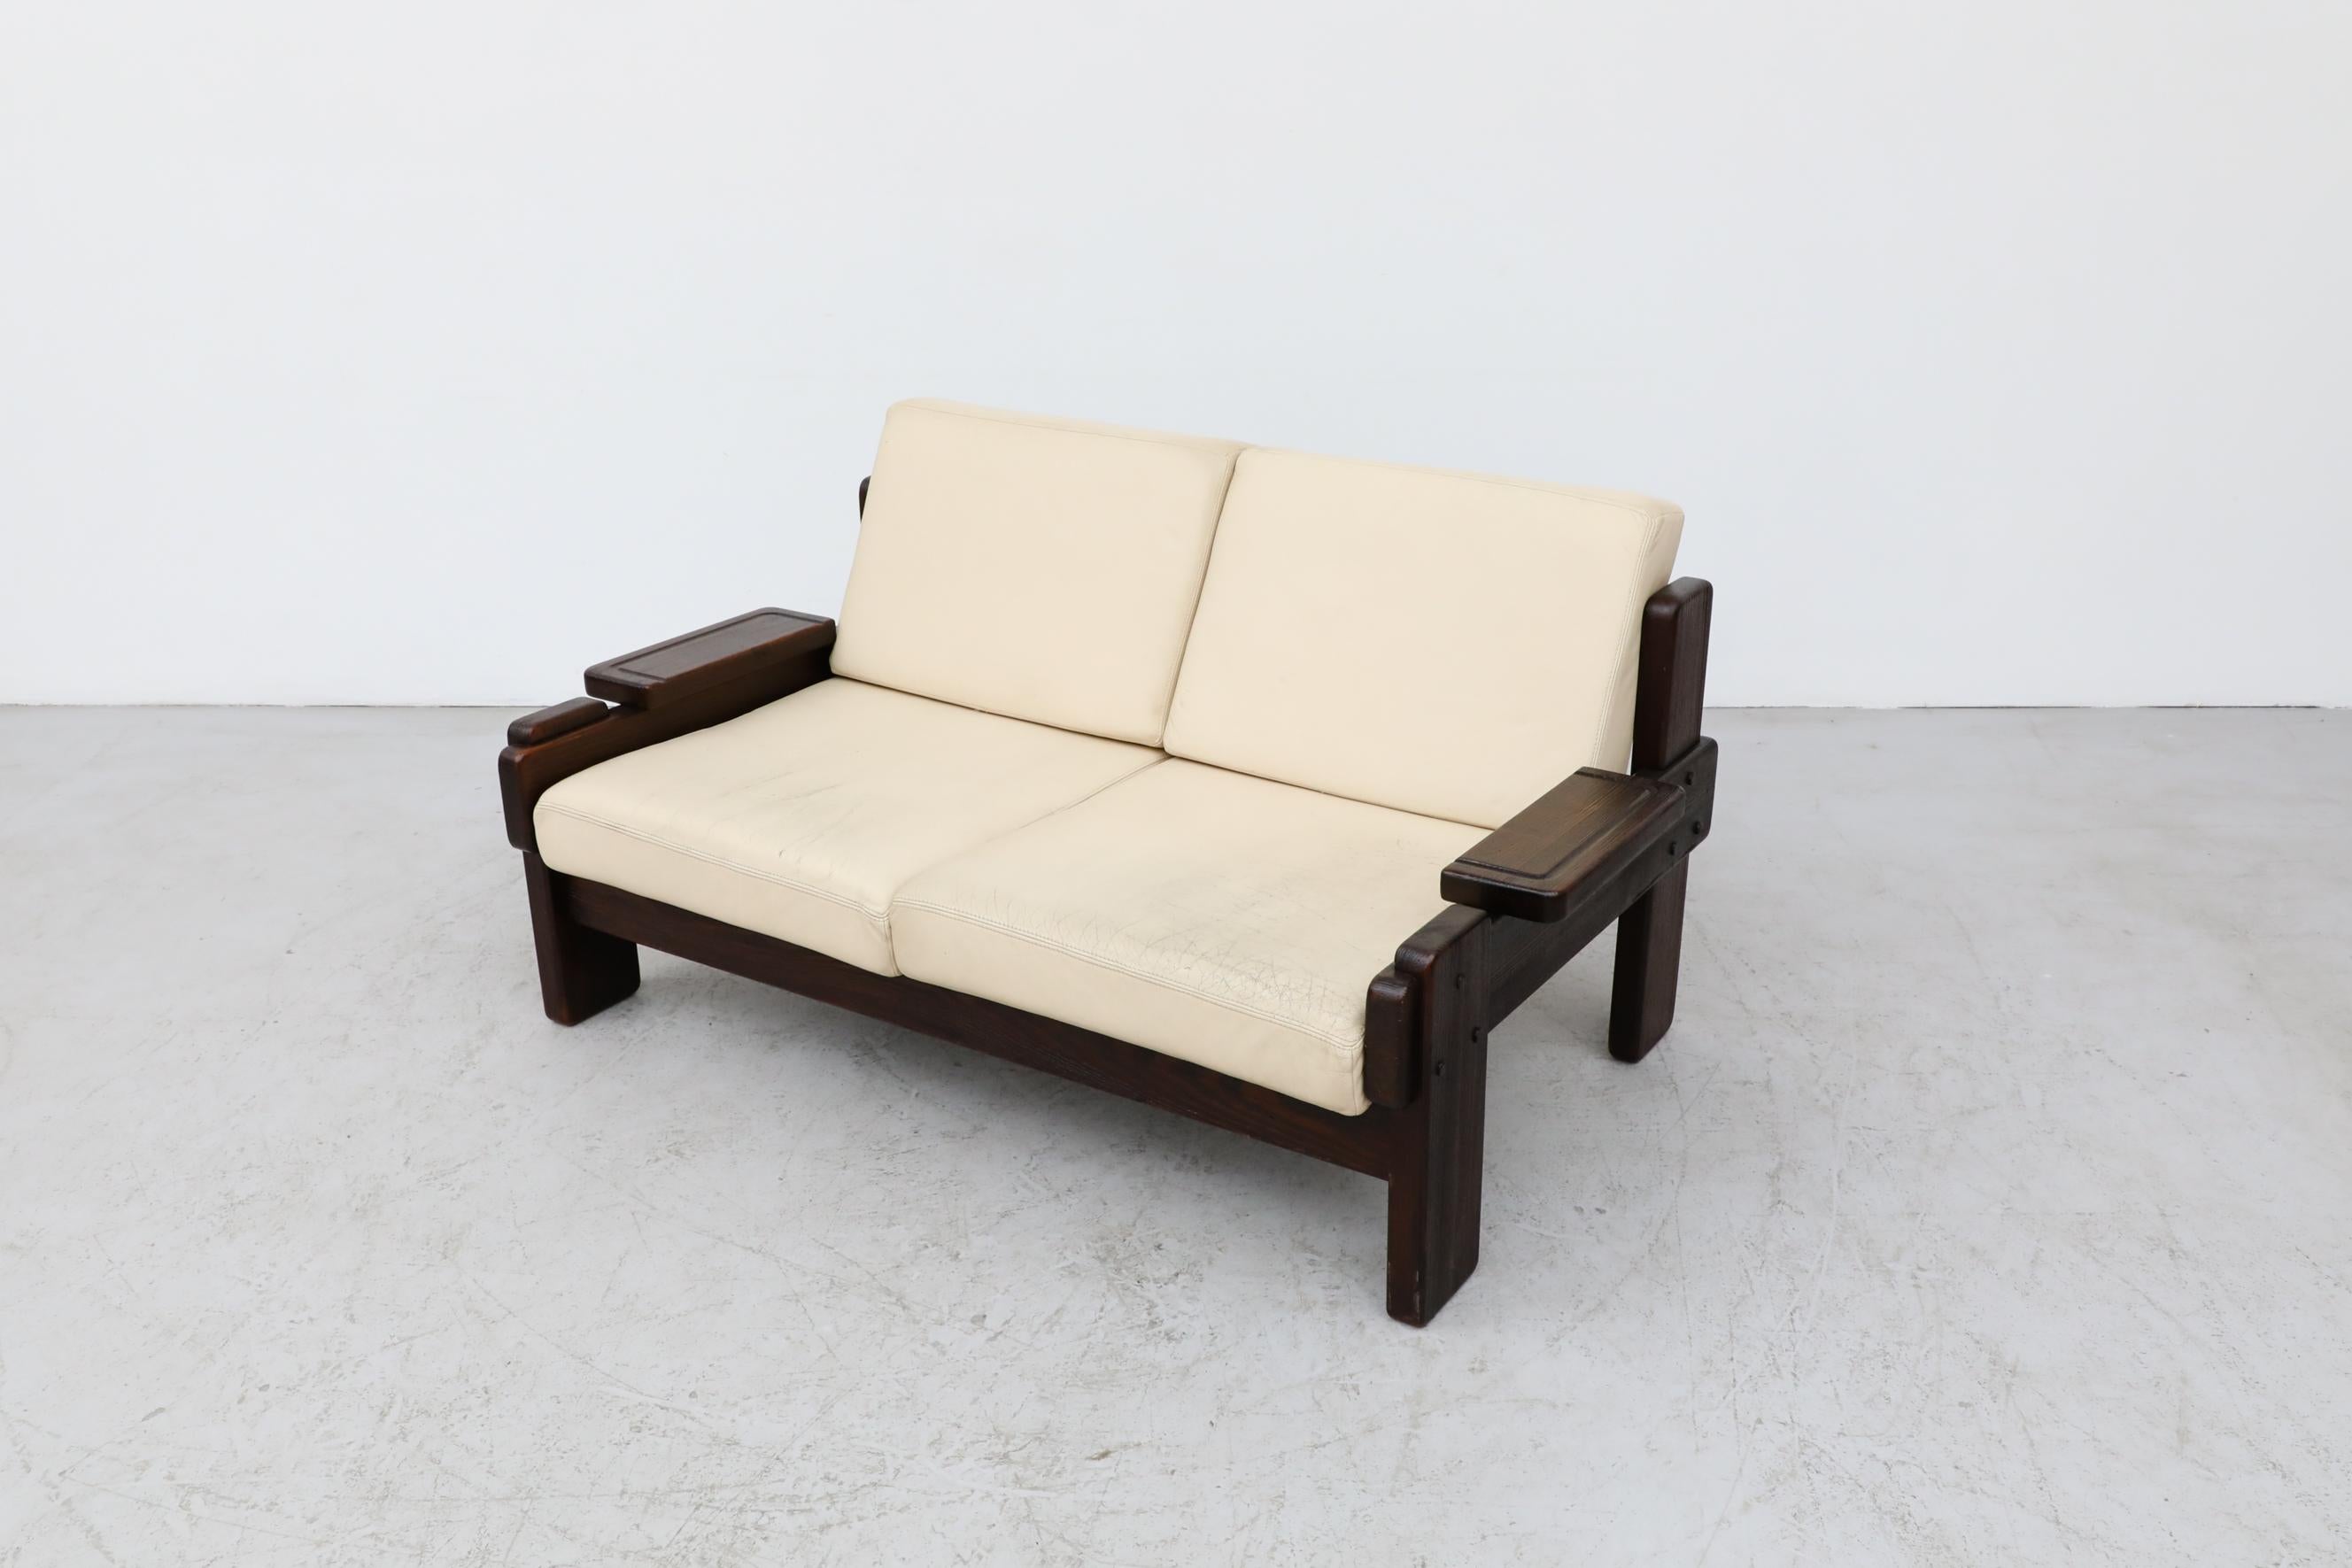 Dutch 70's Brutalist Wood Framed Loveseat with Cream Leather Seating